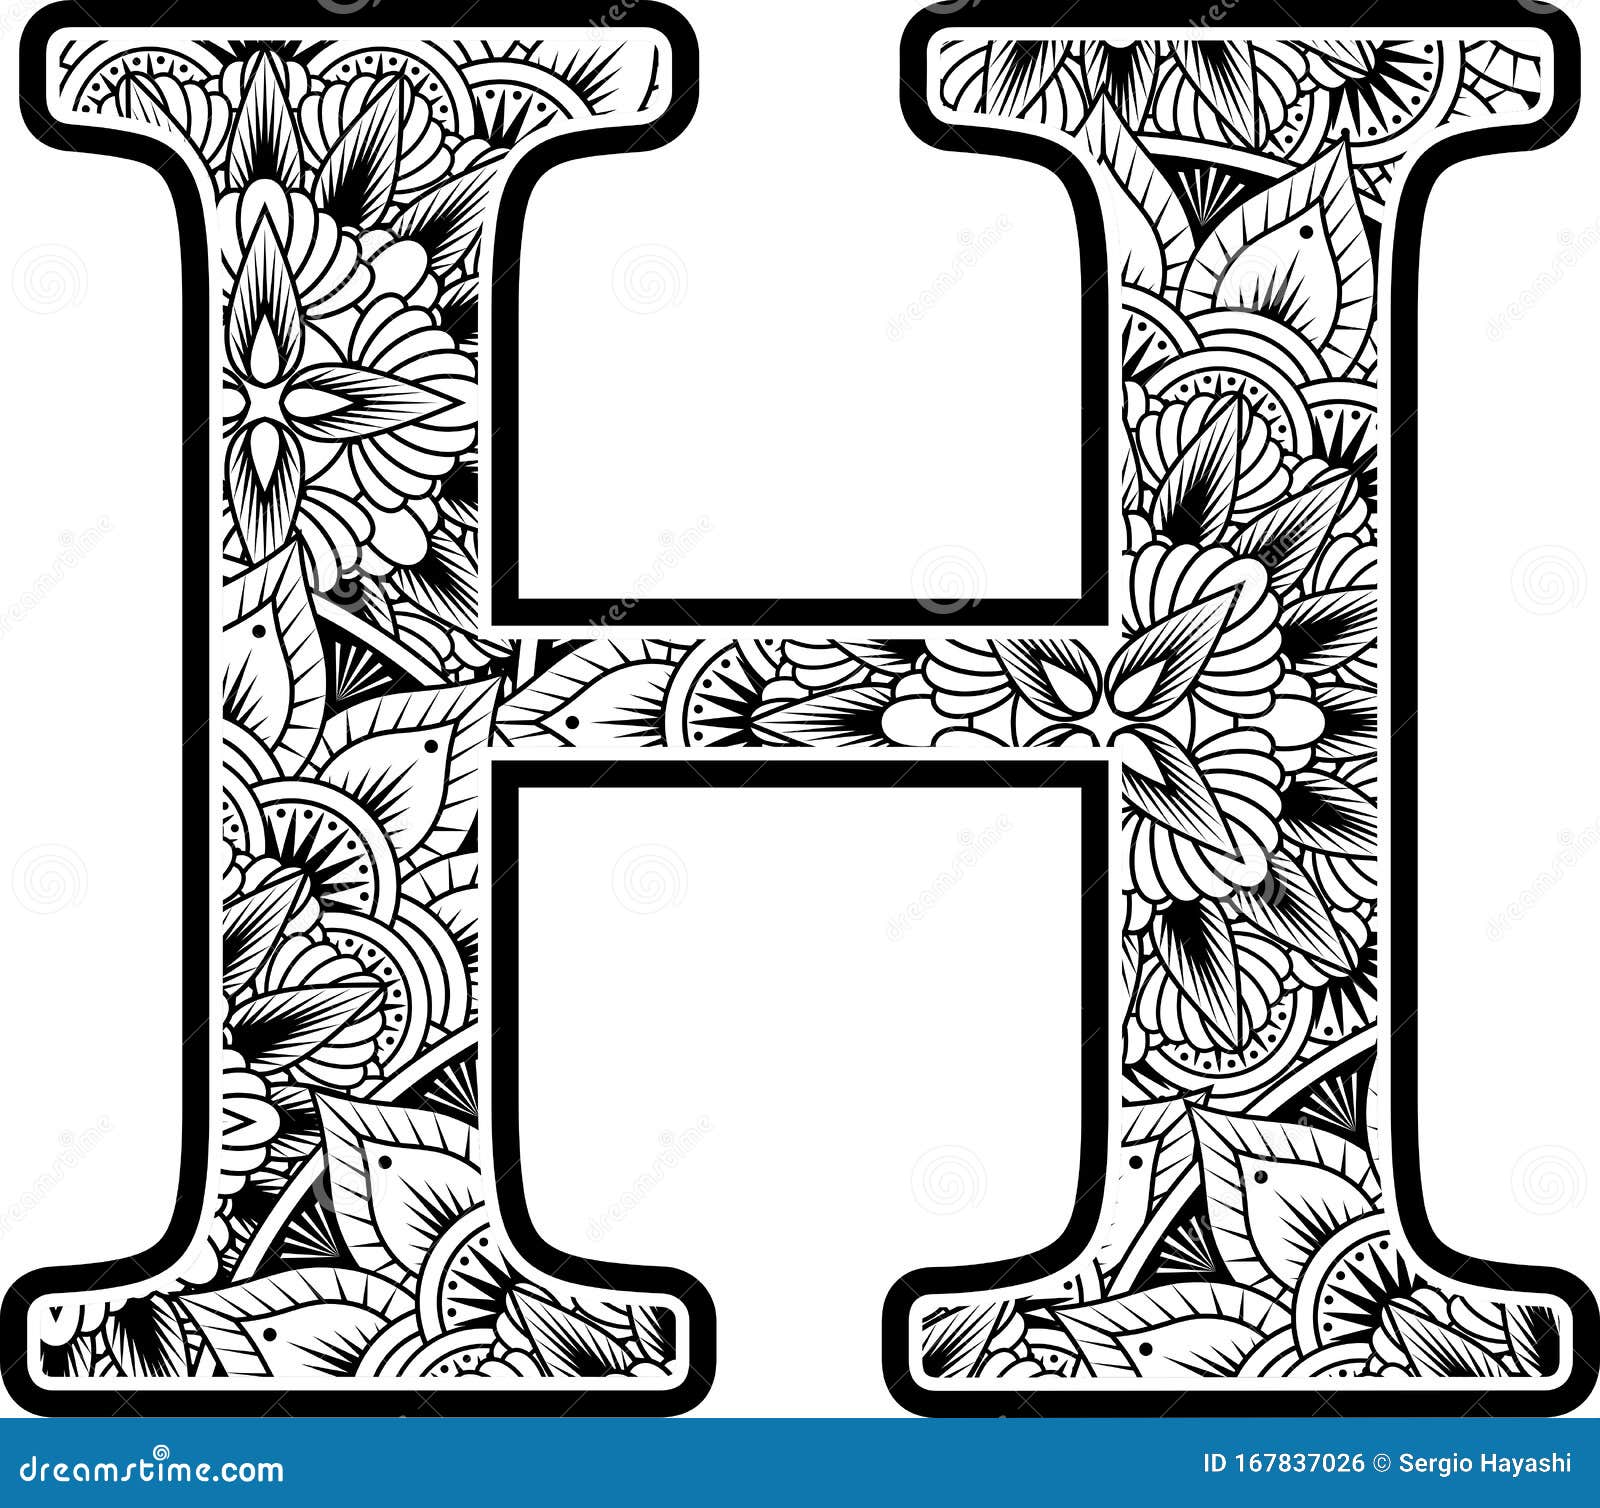 Download Mandala Inspiration Abstract Flowers Capital Letter H ...